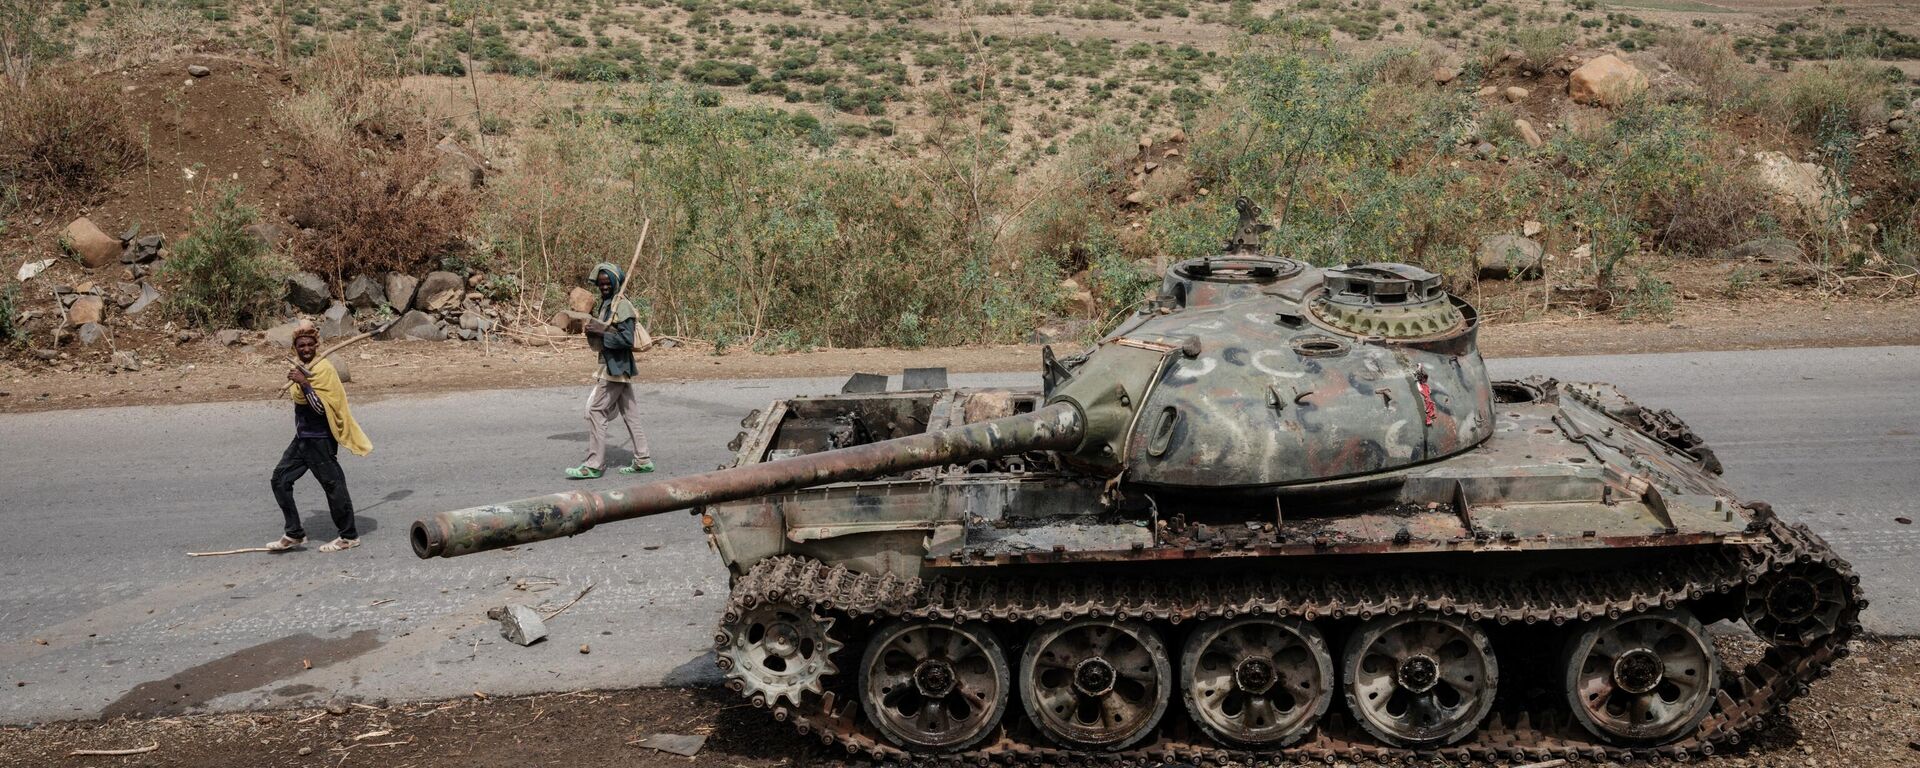 In this file photo taken on June 20, 2021 Local farmers walk next to a tank of alledged Eritrean army that is abandoned along the road in Dansa, southwest of Mekele in Tigray region, Ethiopia. - Sputnik International, 1920, 24.08.2022